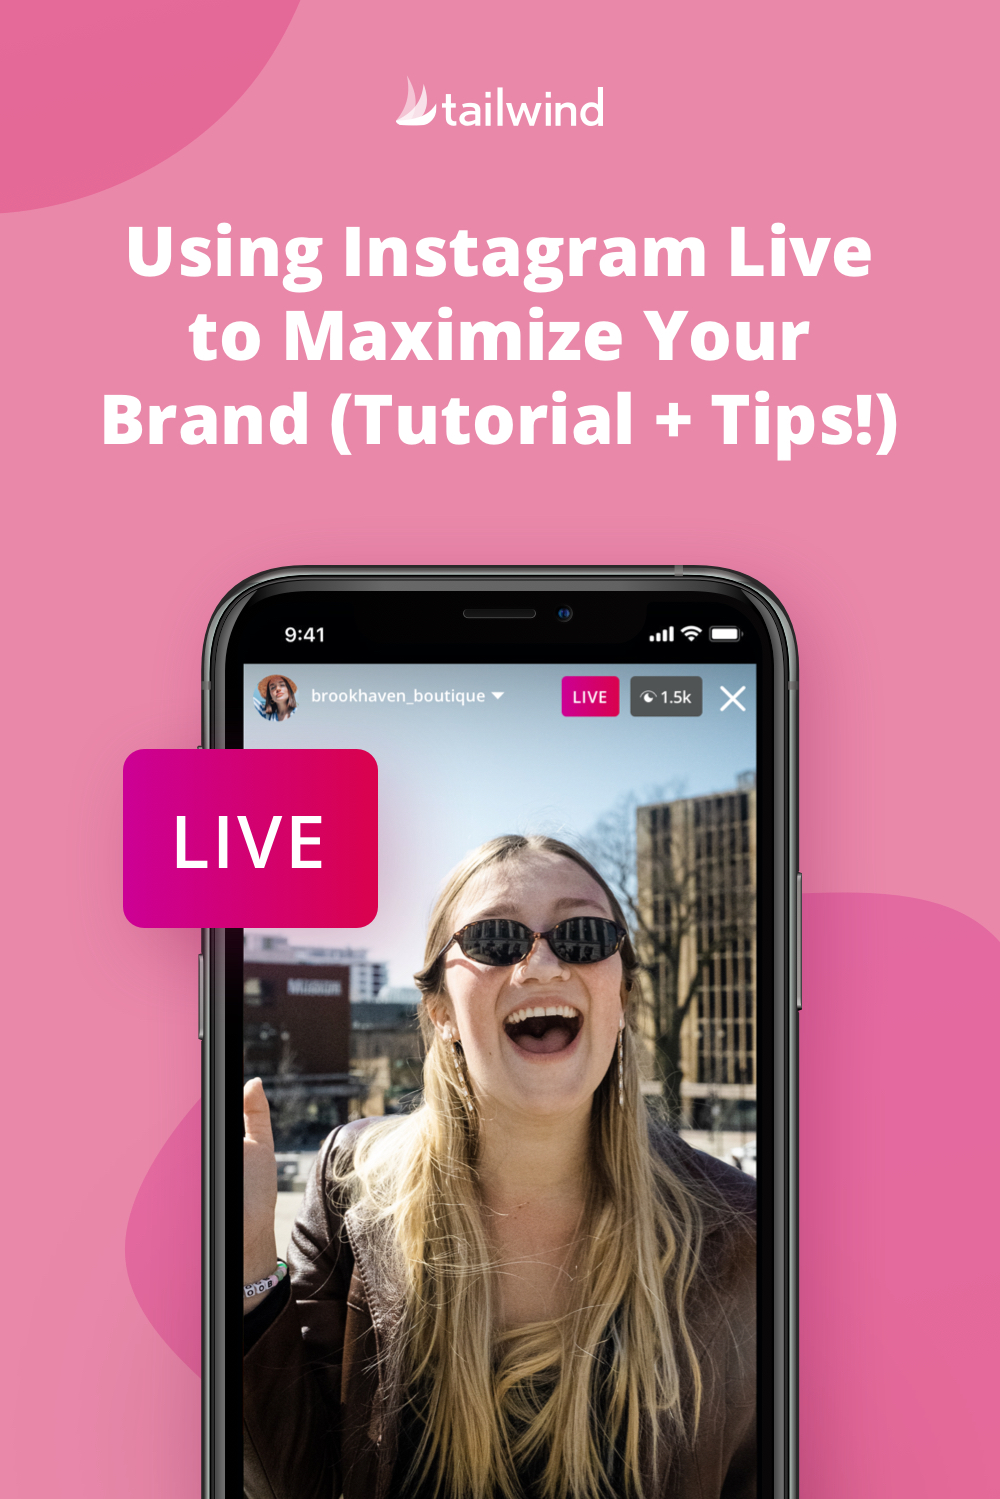 Use Instagram Live to Build Your Brand (Tutorial + Tips!)